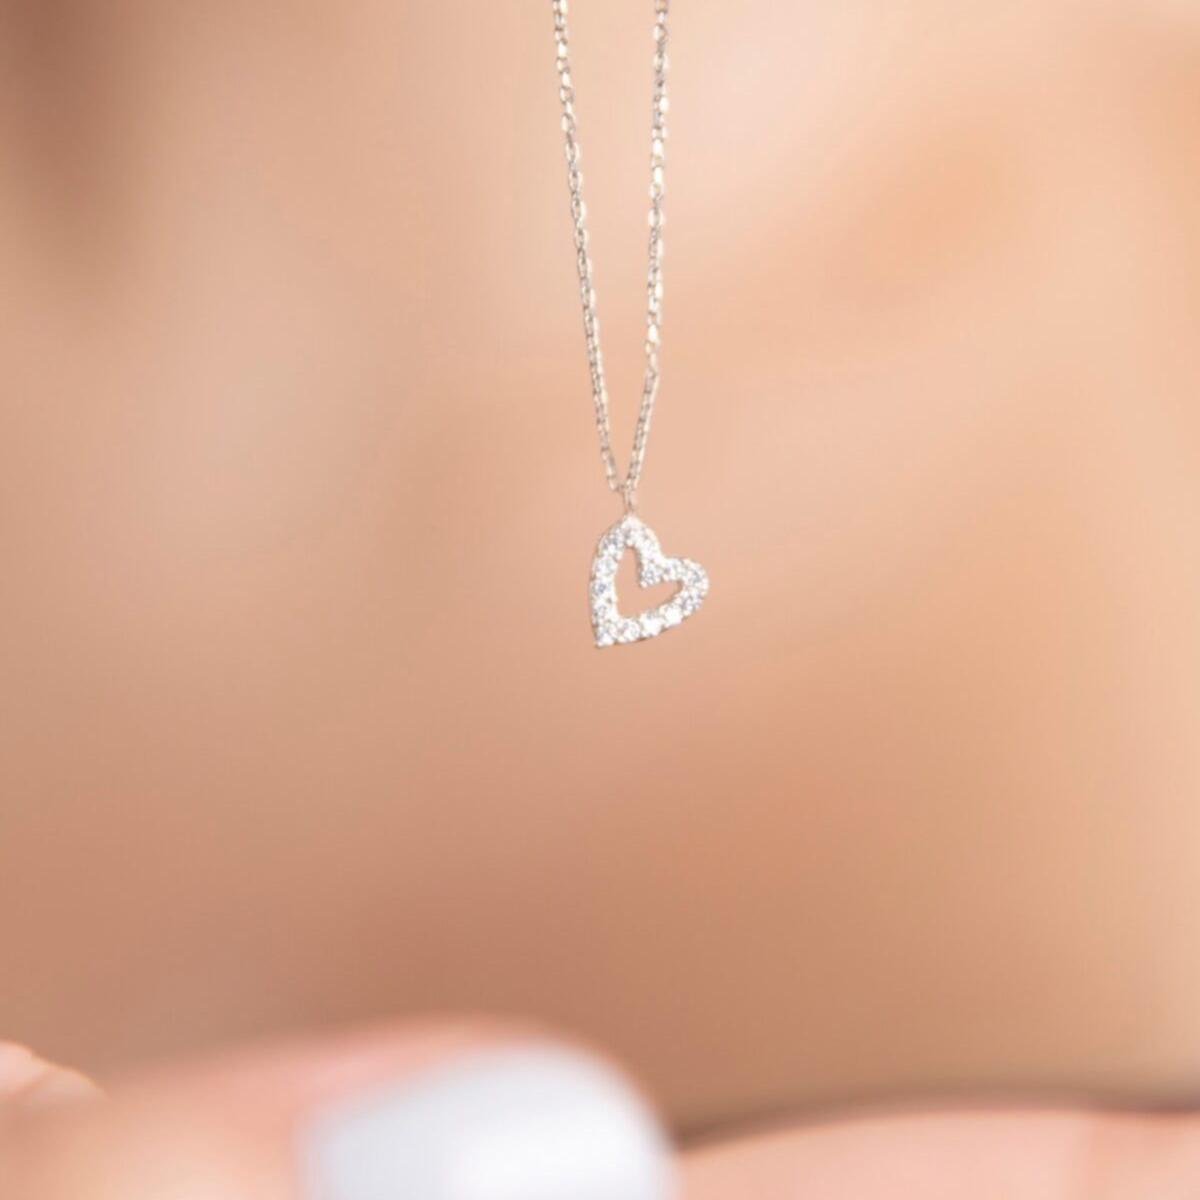 Tiny Heart Necklace • Tiny Necklace Delicate • Tiny Diamond Necklace - Trending Silver Gifts